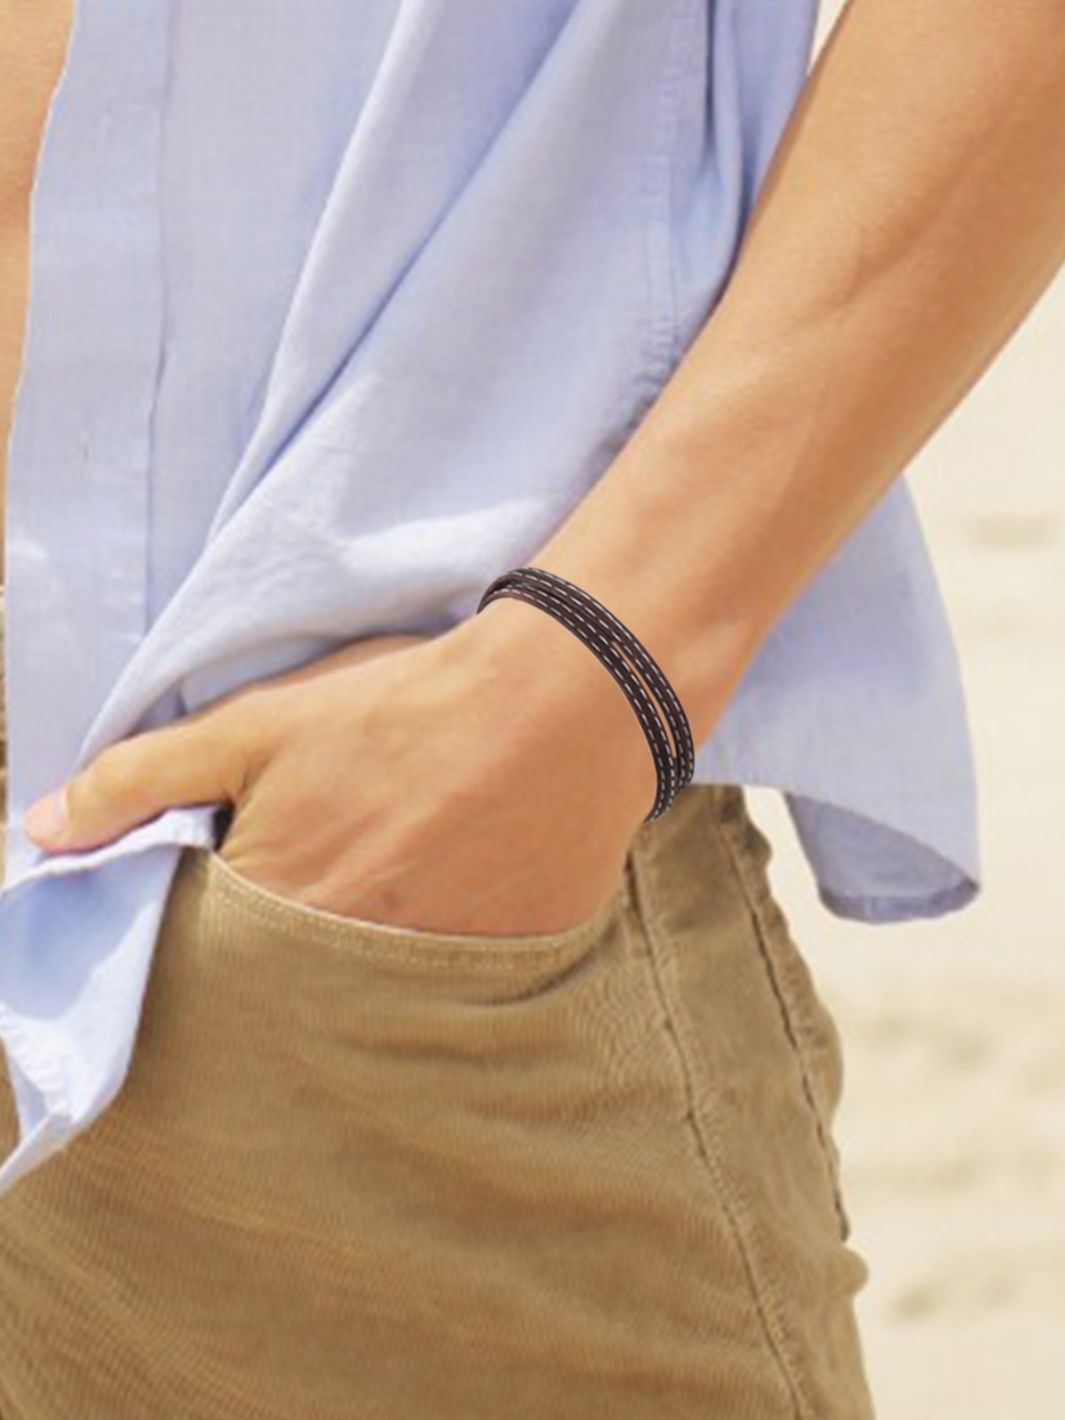 Mens Bracelets Guide for the perfect style.